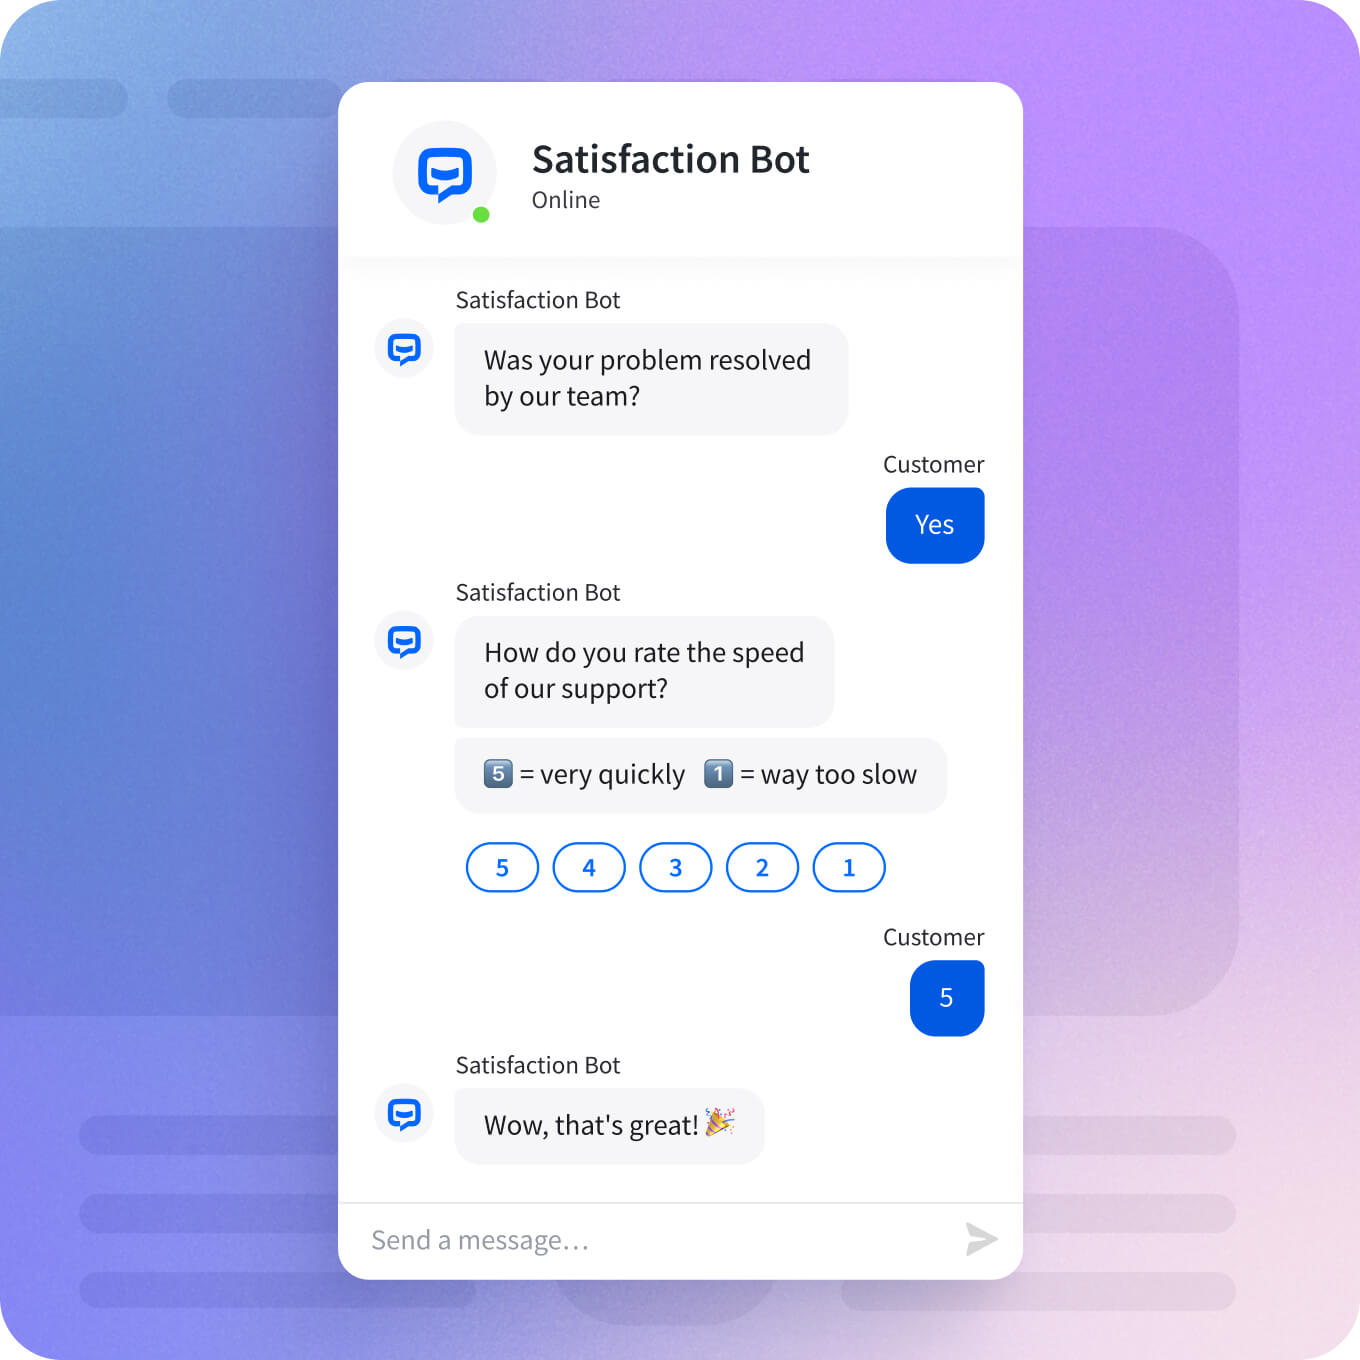 An AI bot called 'Satisfaction Bot' asks a customer if their problem was resolved, followed by a rating question on the speed of support. The customer provides positive feedback and a high rating.